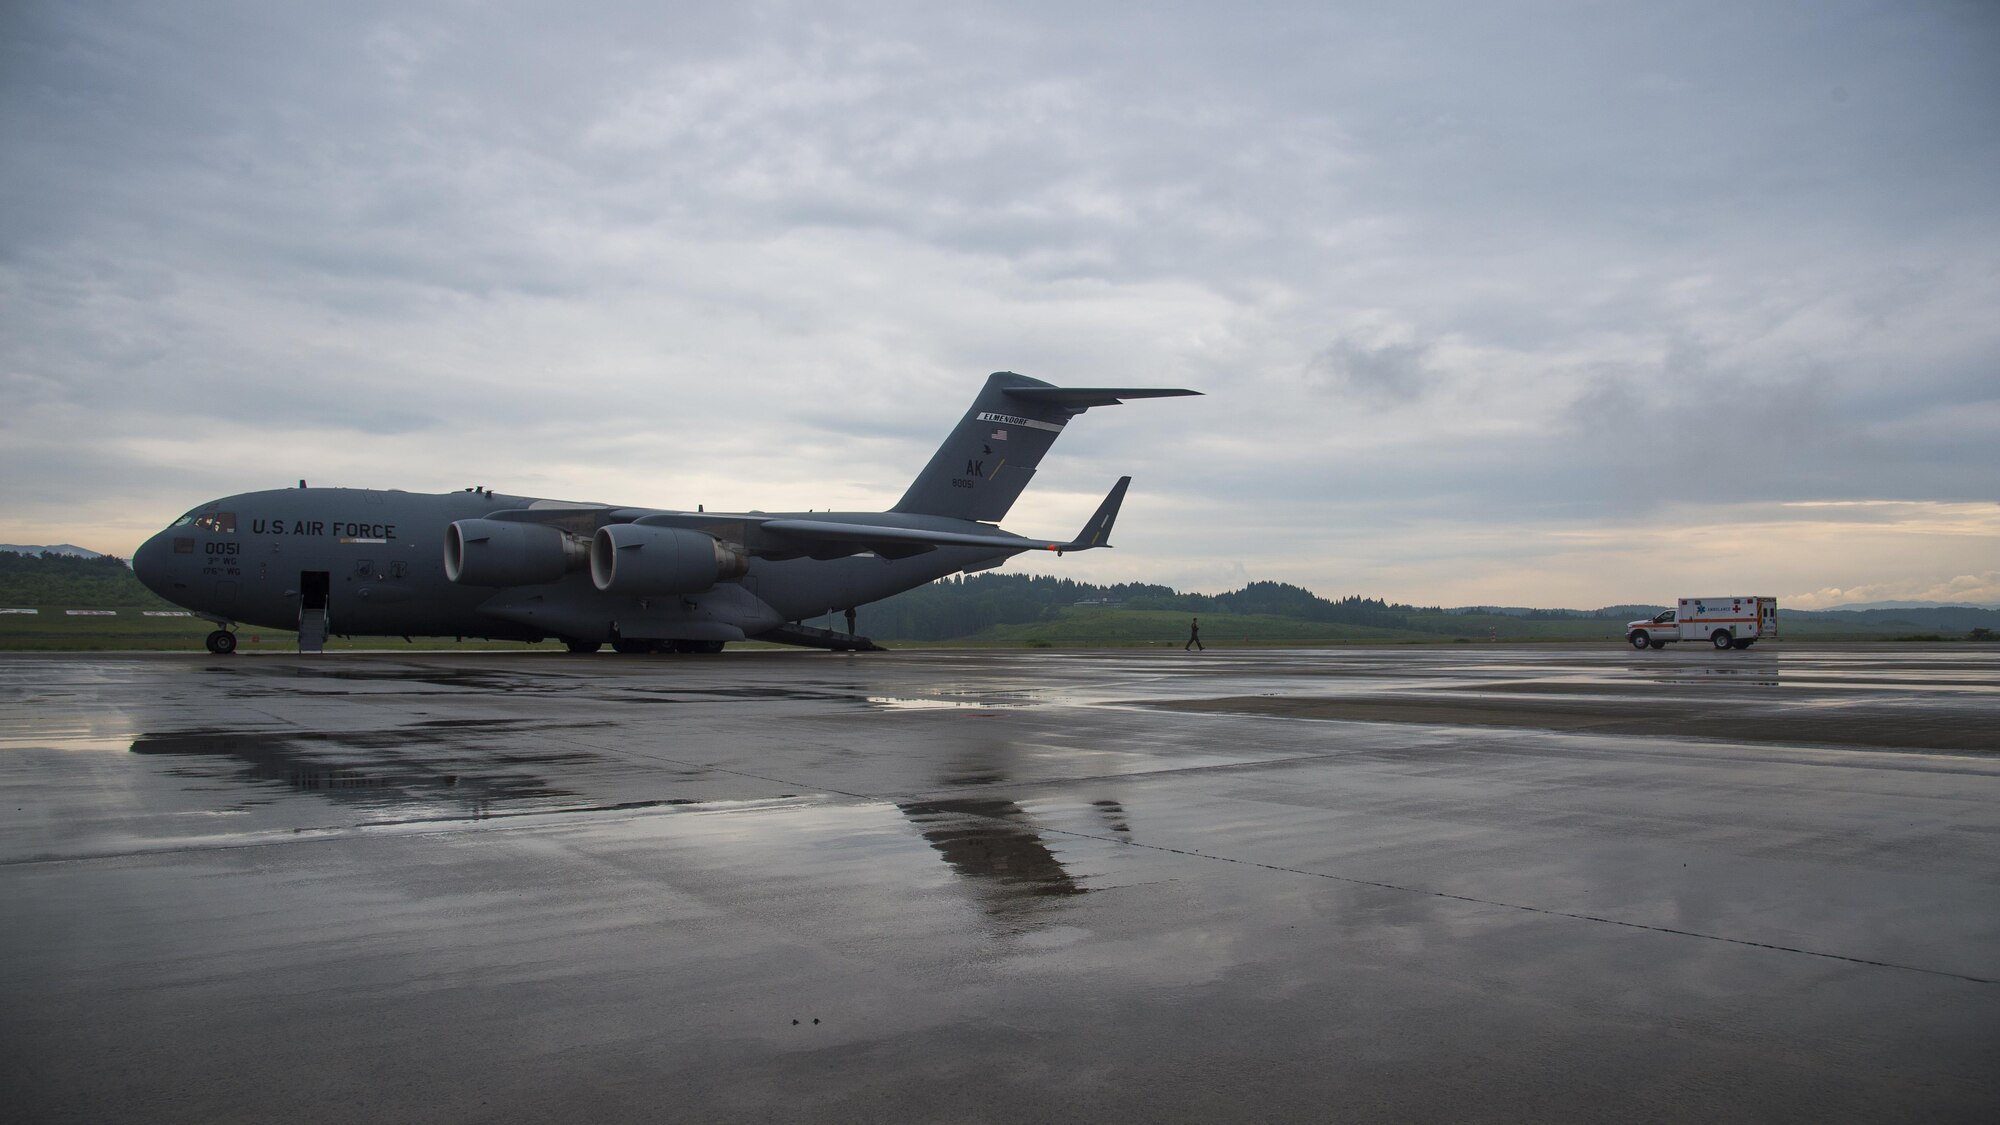 A C-17 Globemaster III sits on the Aomori Airport runway during an aeromedical evacuation in Aomori, Japan, June 15, 2017. Once the C-17 landed, a neonatal intensive care unit team from the U.S. Navy hospital, Okinawa, Japan, joined 35th Medical Group personnel to prepare the newborn for the flight. (U.S. Air Force photo by Senior Airman Deana Heitzman)